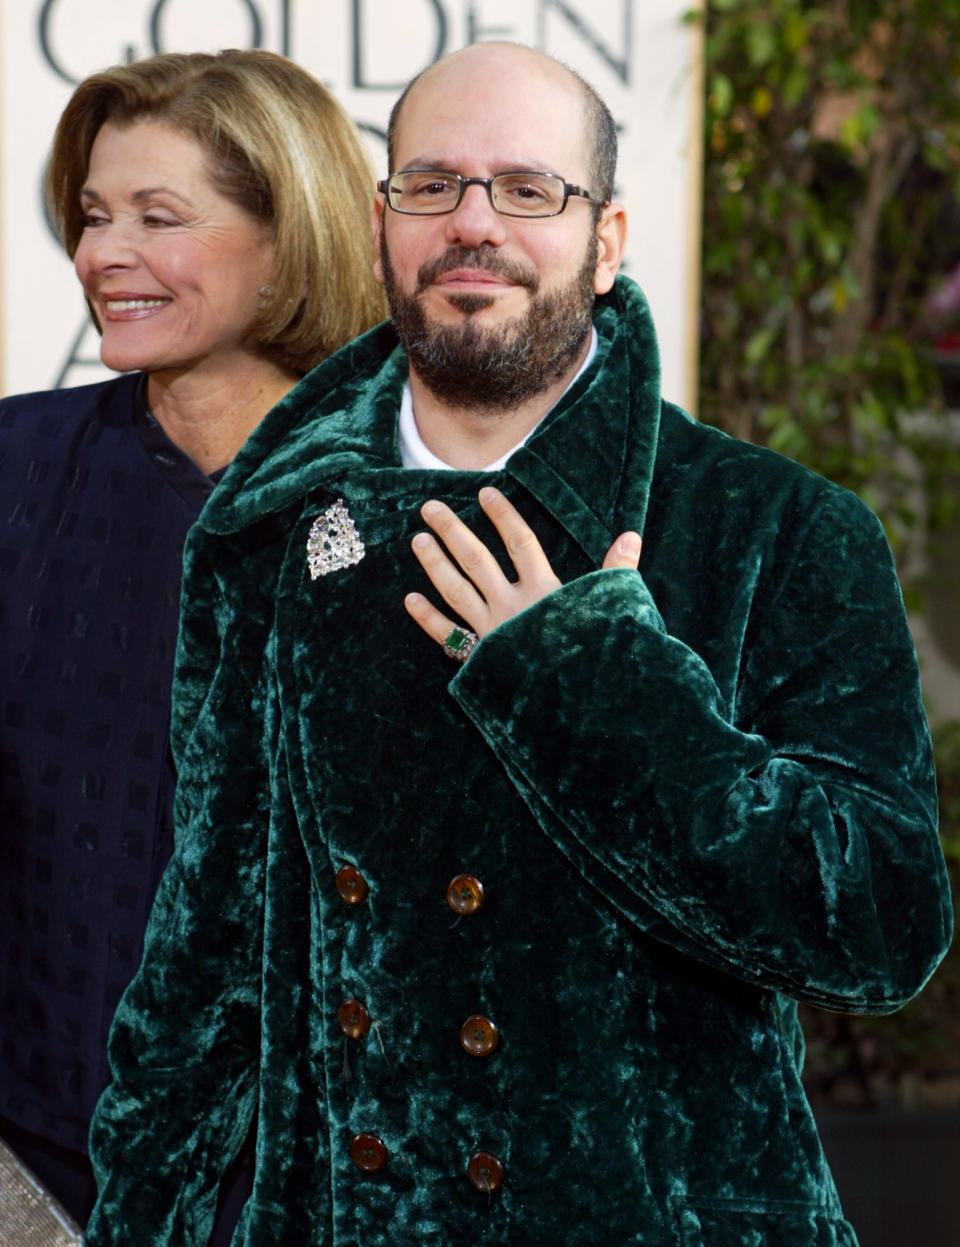 FILE - In this Jan. 25, 2004 file photo comedian David Cross and actress Jessica Walter, of the television comedy "arrested Development," arrive for the 61st Annual Golden Globe Awards in Beverly Hills, Calif. The University of Utah says a tweet from comedian Cross showing him wearing undergarments sacred to the Mormon faith was "deeply offensive." Still, President Ruth Watkins resisted online calls to cancel his upcoming performance on campus, saying in a statement Sunday, Aug. 19, 2018, the photo intended to promote the show is protected by the First Amendment. (AP Photo/Kevork Djansezian,File)